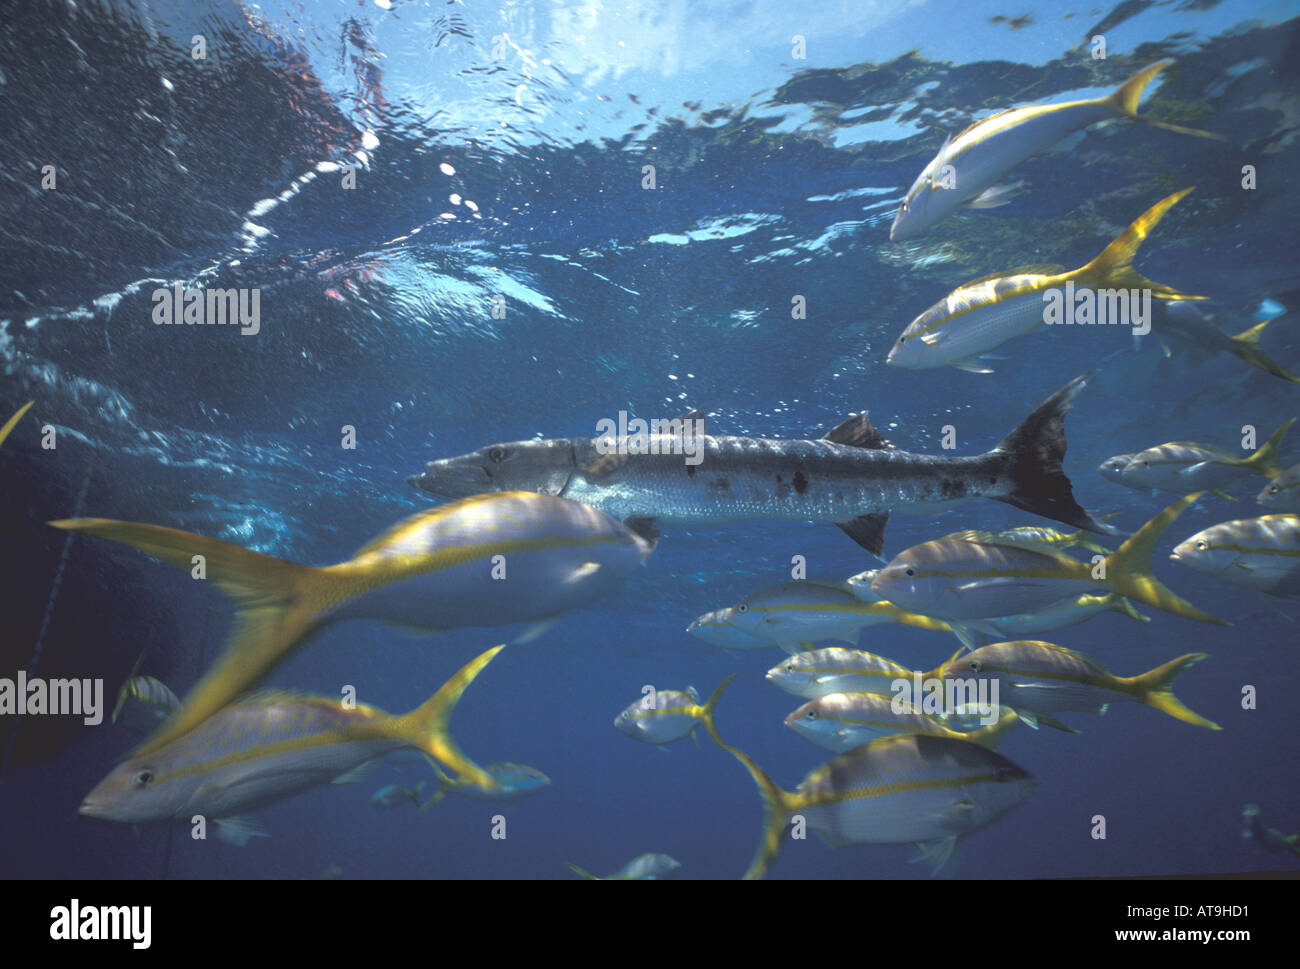 underwater barracuda and yellowtail snapper Stock Photo